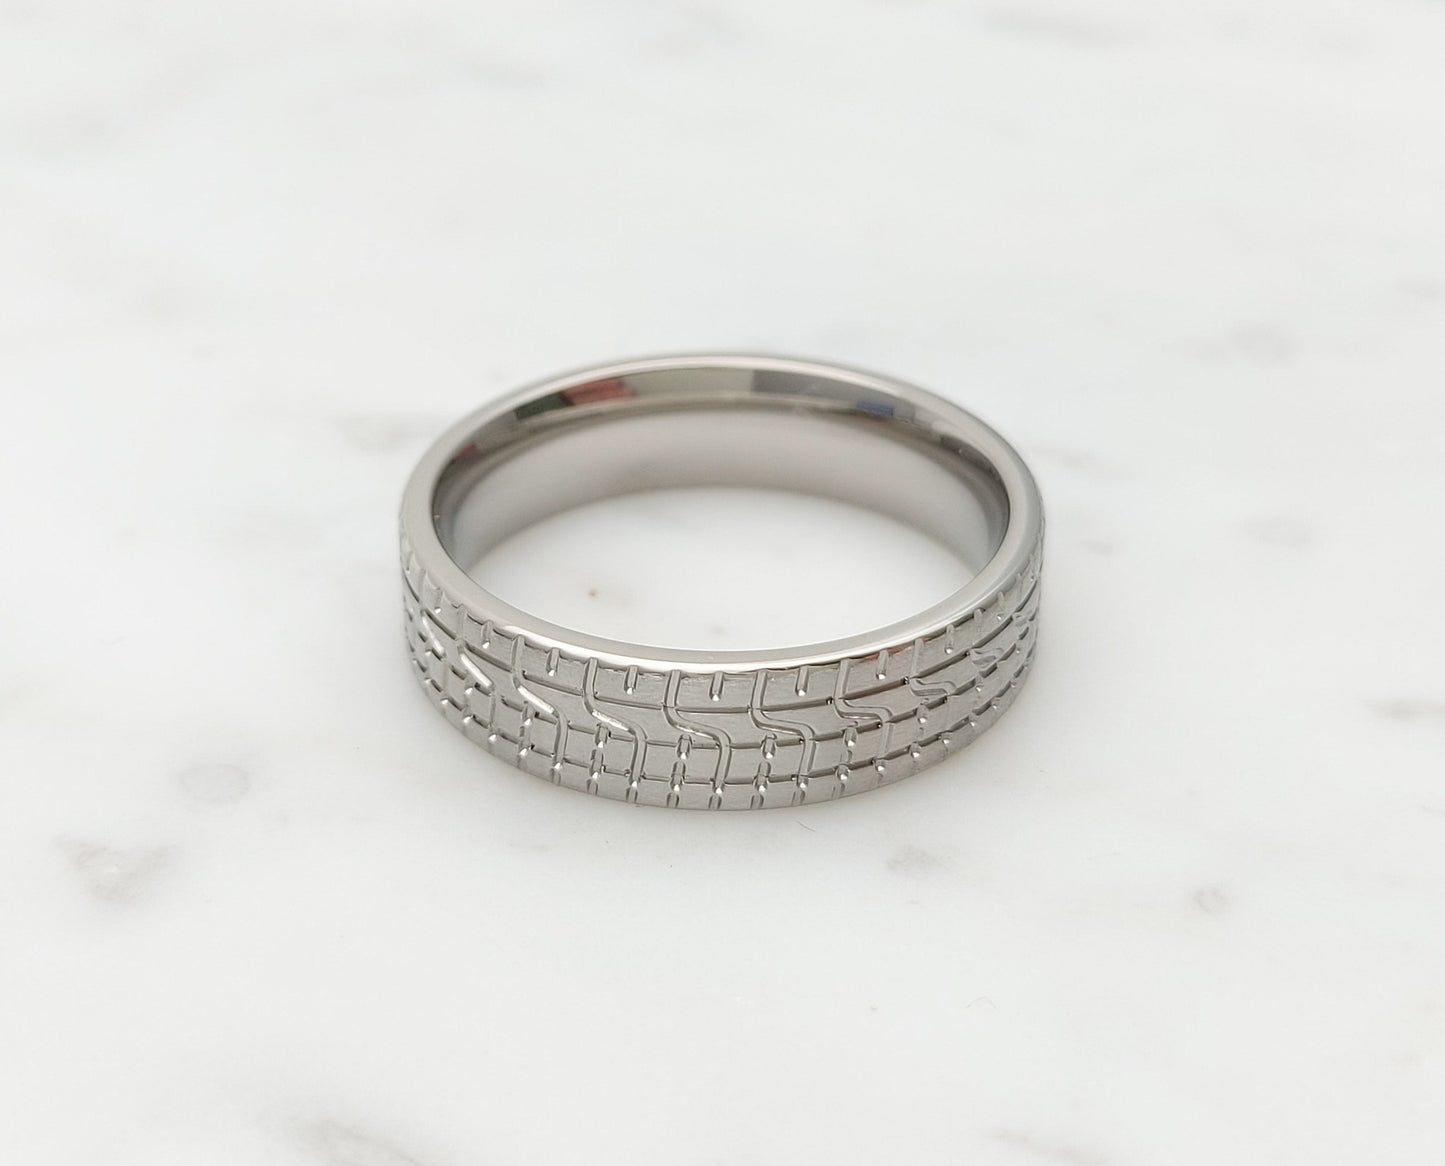 6mm Tire tread ring in pure Titanium - Wedding ring band for men and women